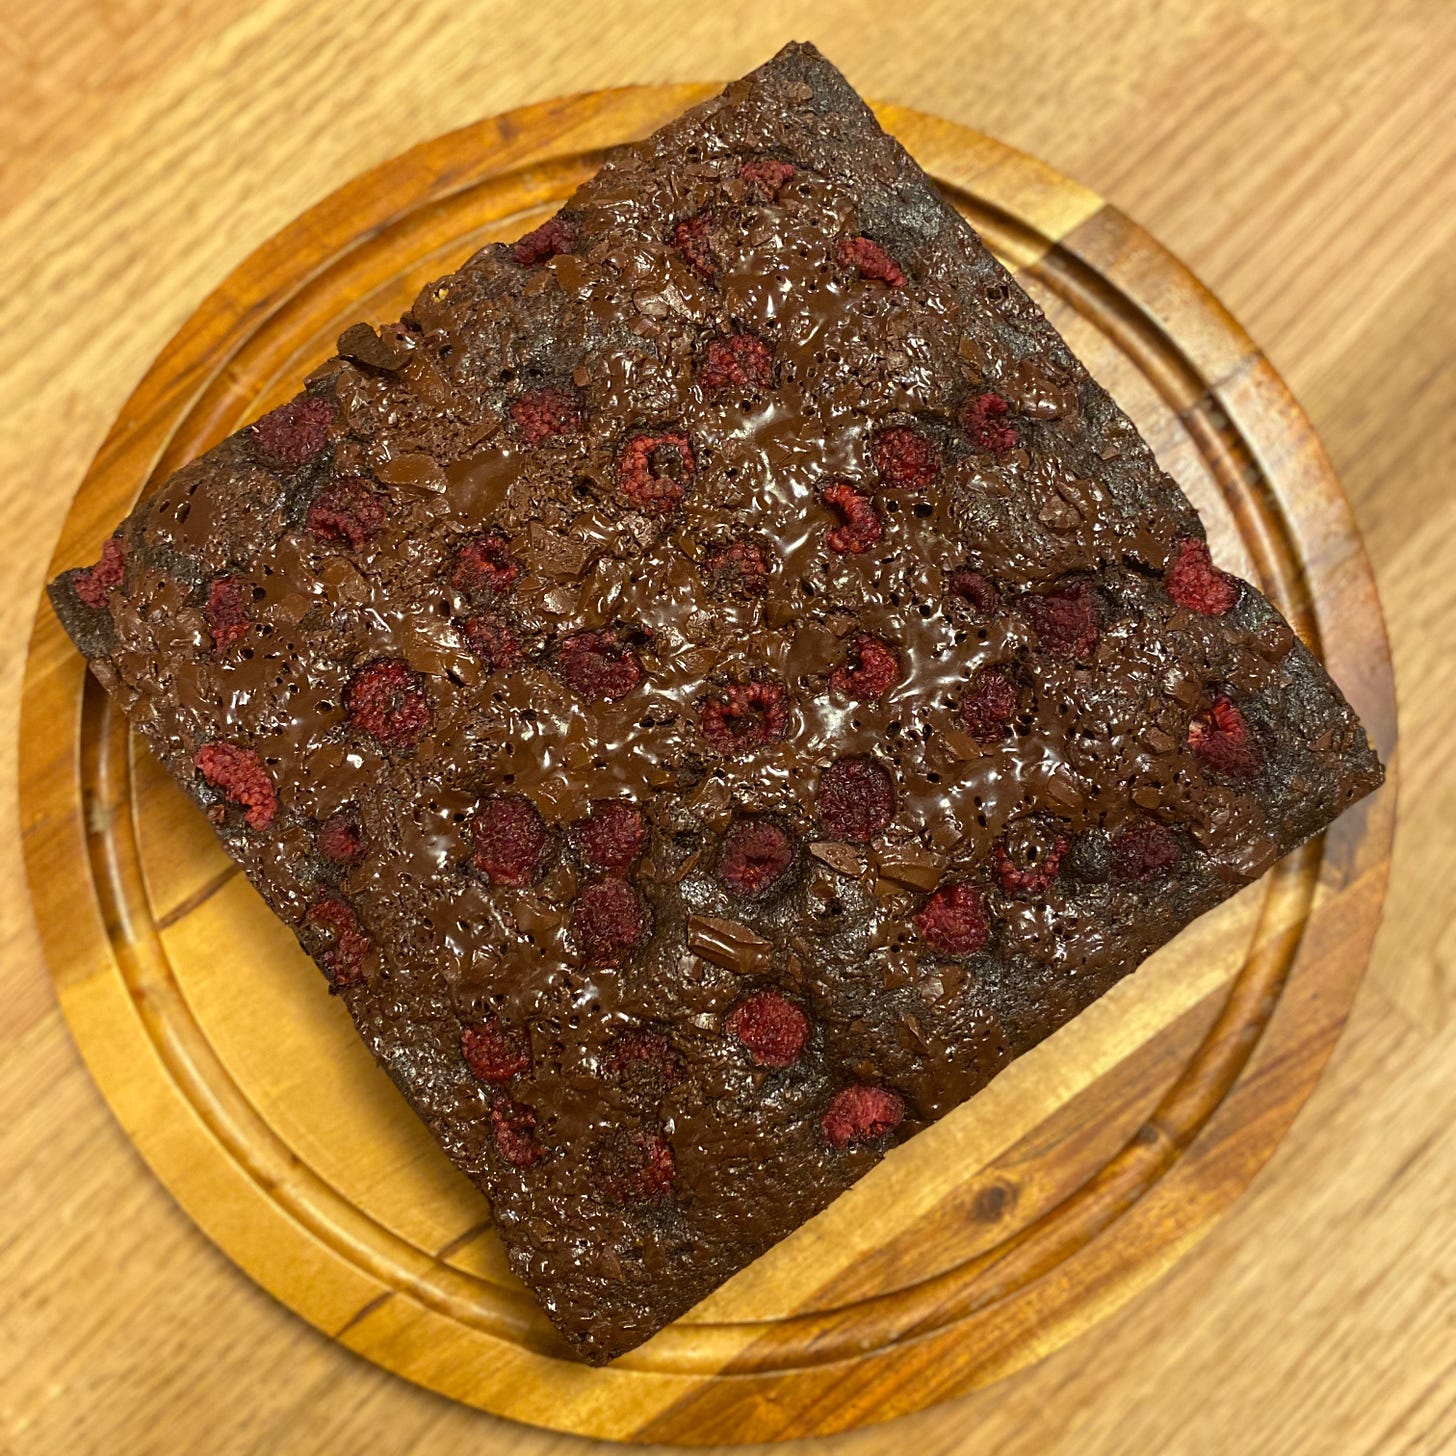 A square chocolate cake, topped with melted chopped chocolate and raspberries, sits on a wooden cake platter.